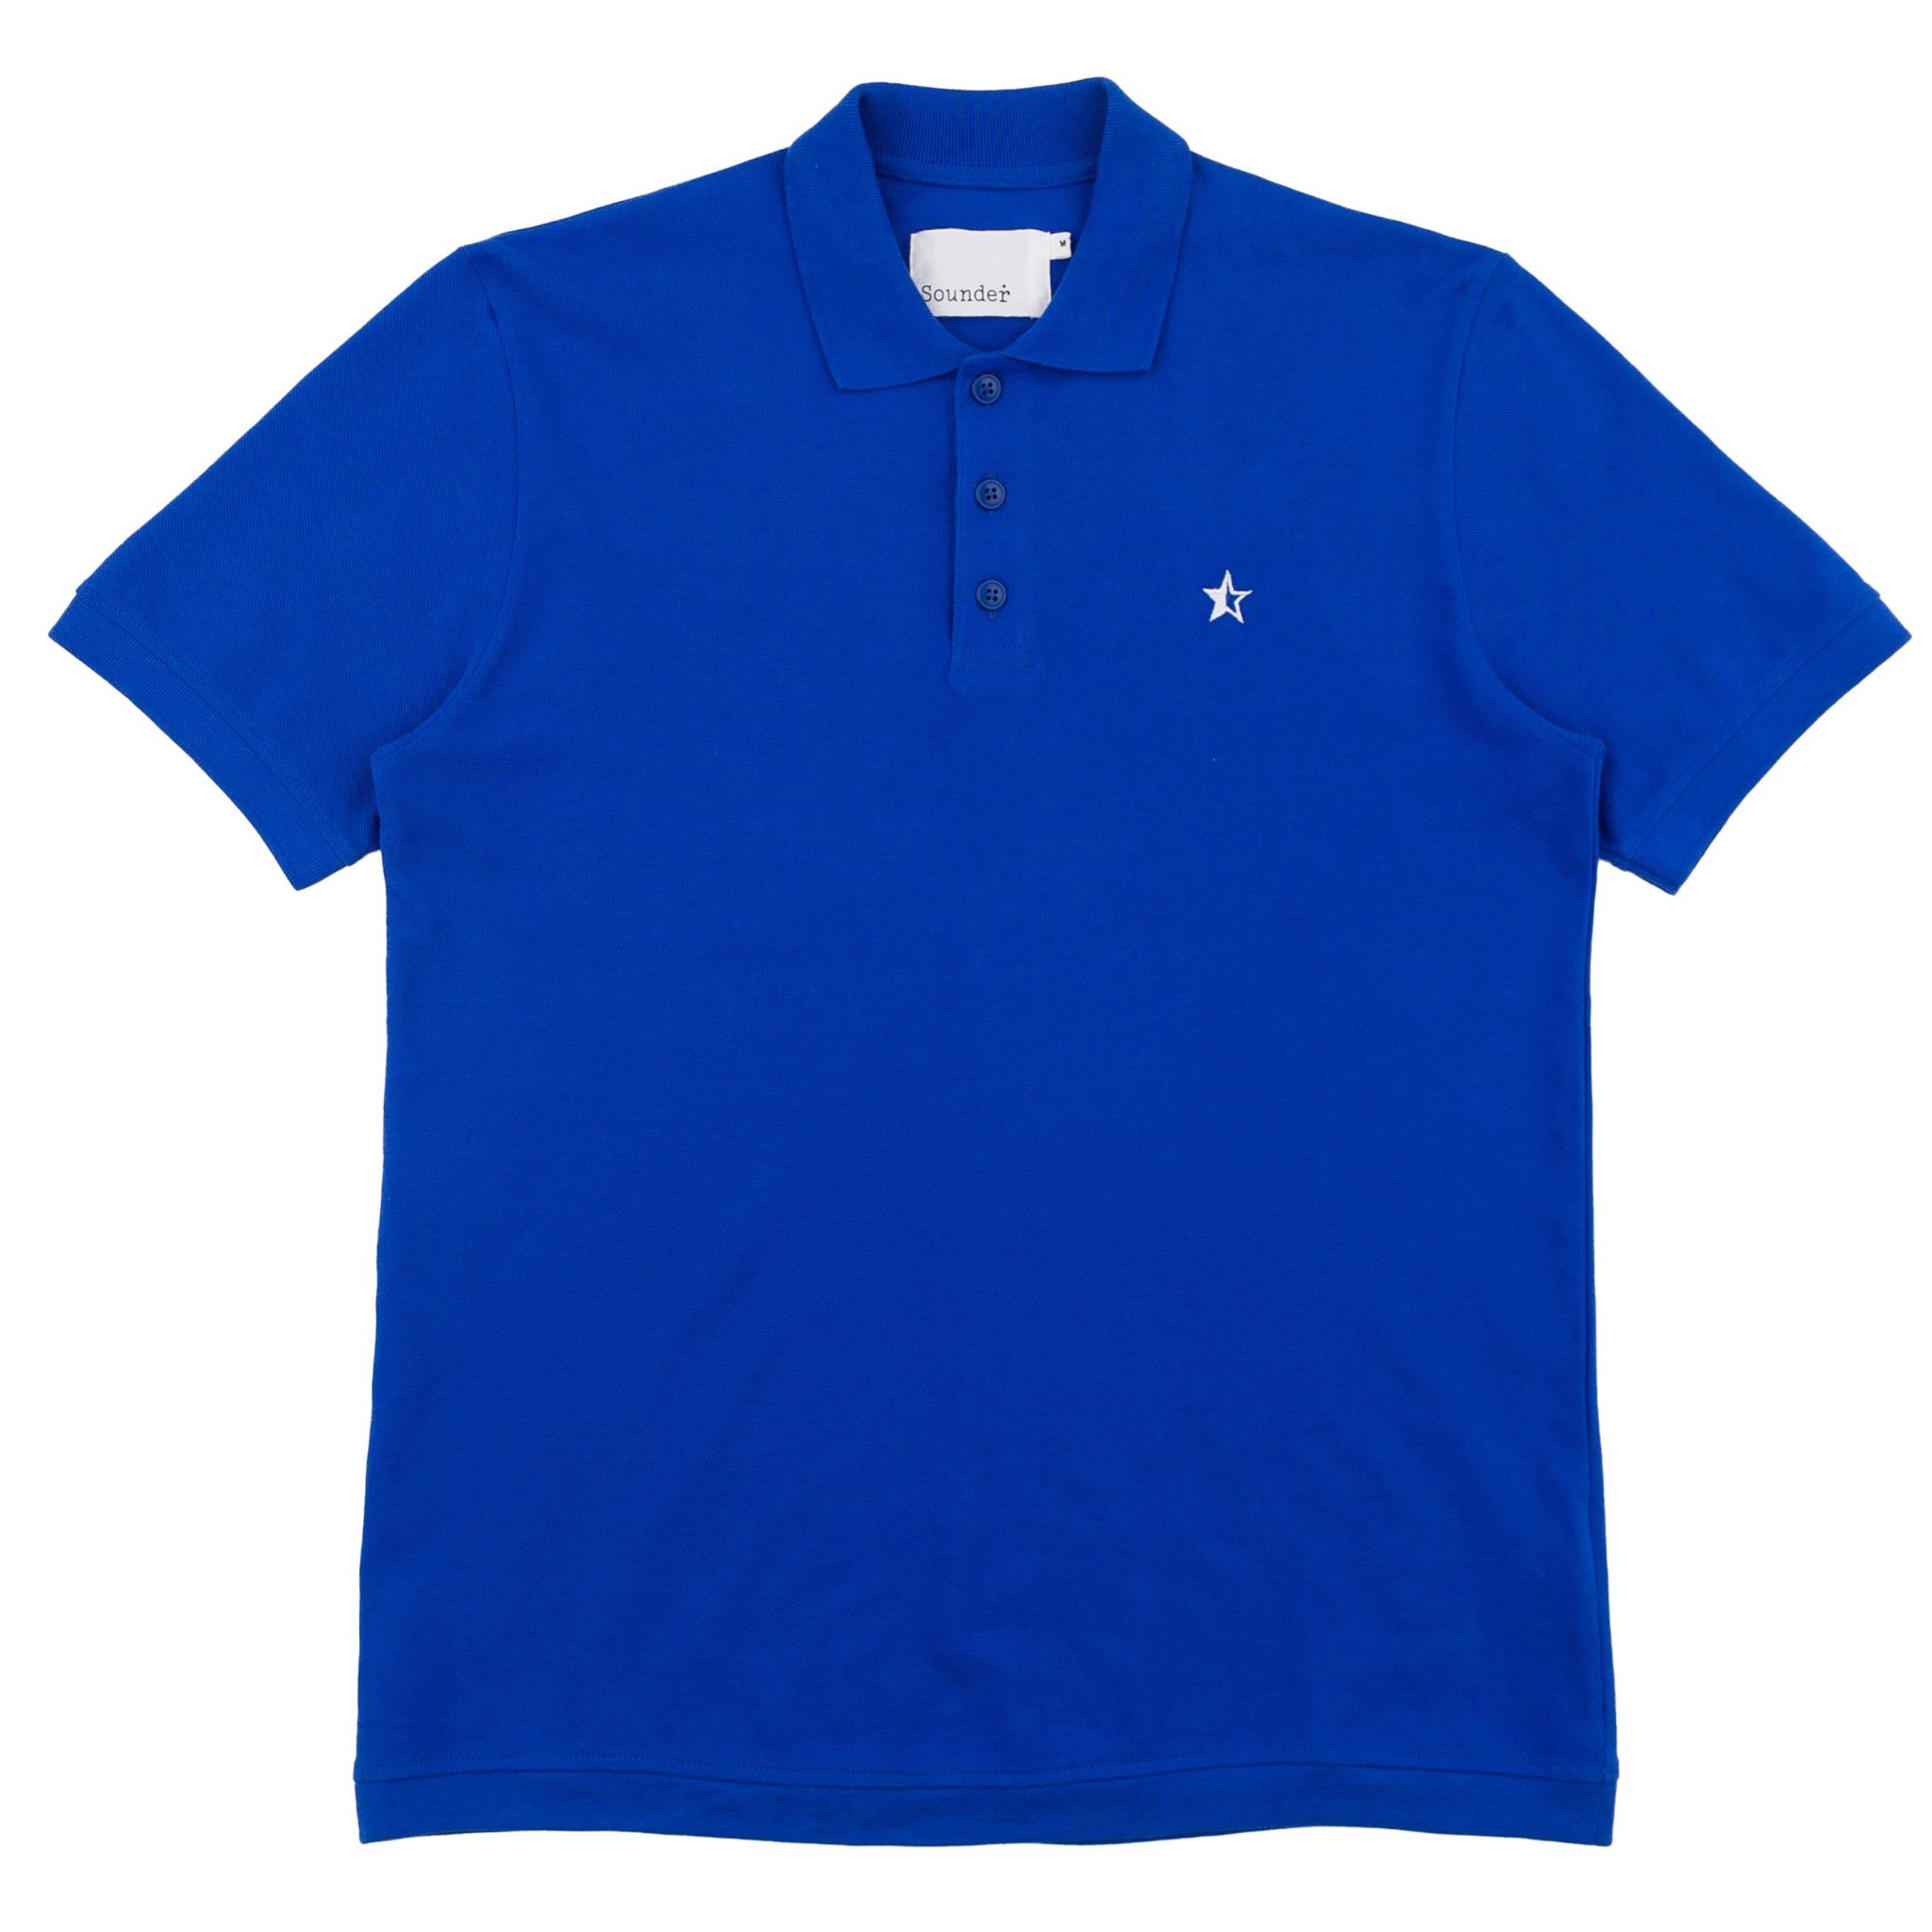 Men’s Blue Play Well Polo - Cobalt Extra Large Sounder